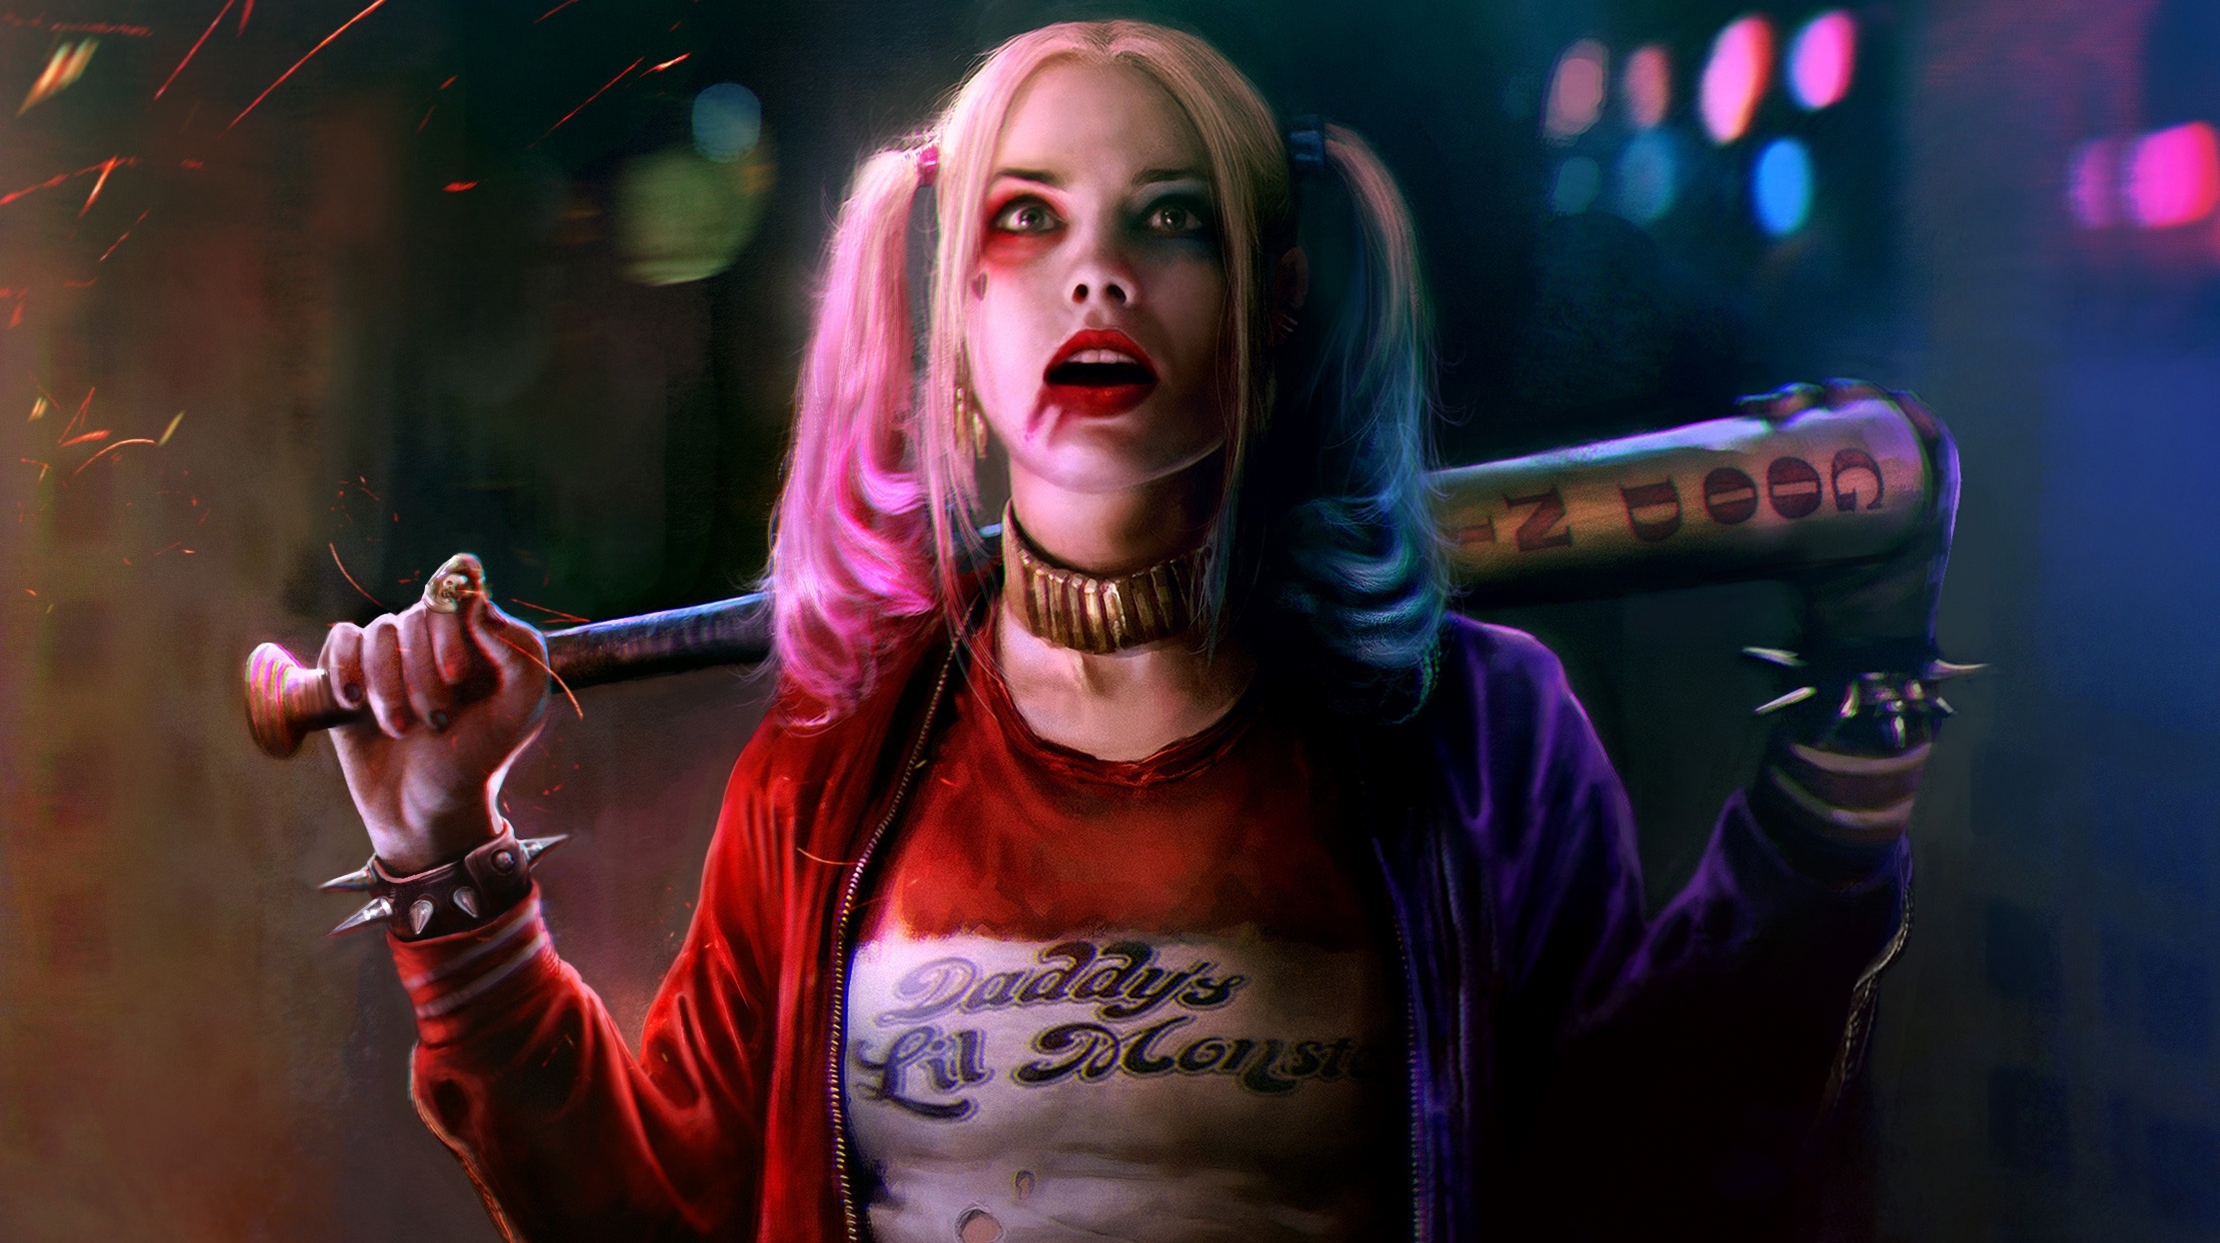 blonde, harley quinn, movie, collar, suicide squad, margot robbie, baseball bat, dc comics, spikes, two toned hair cellphone